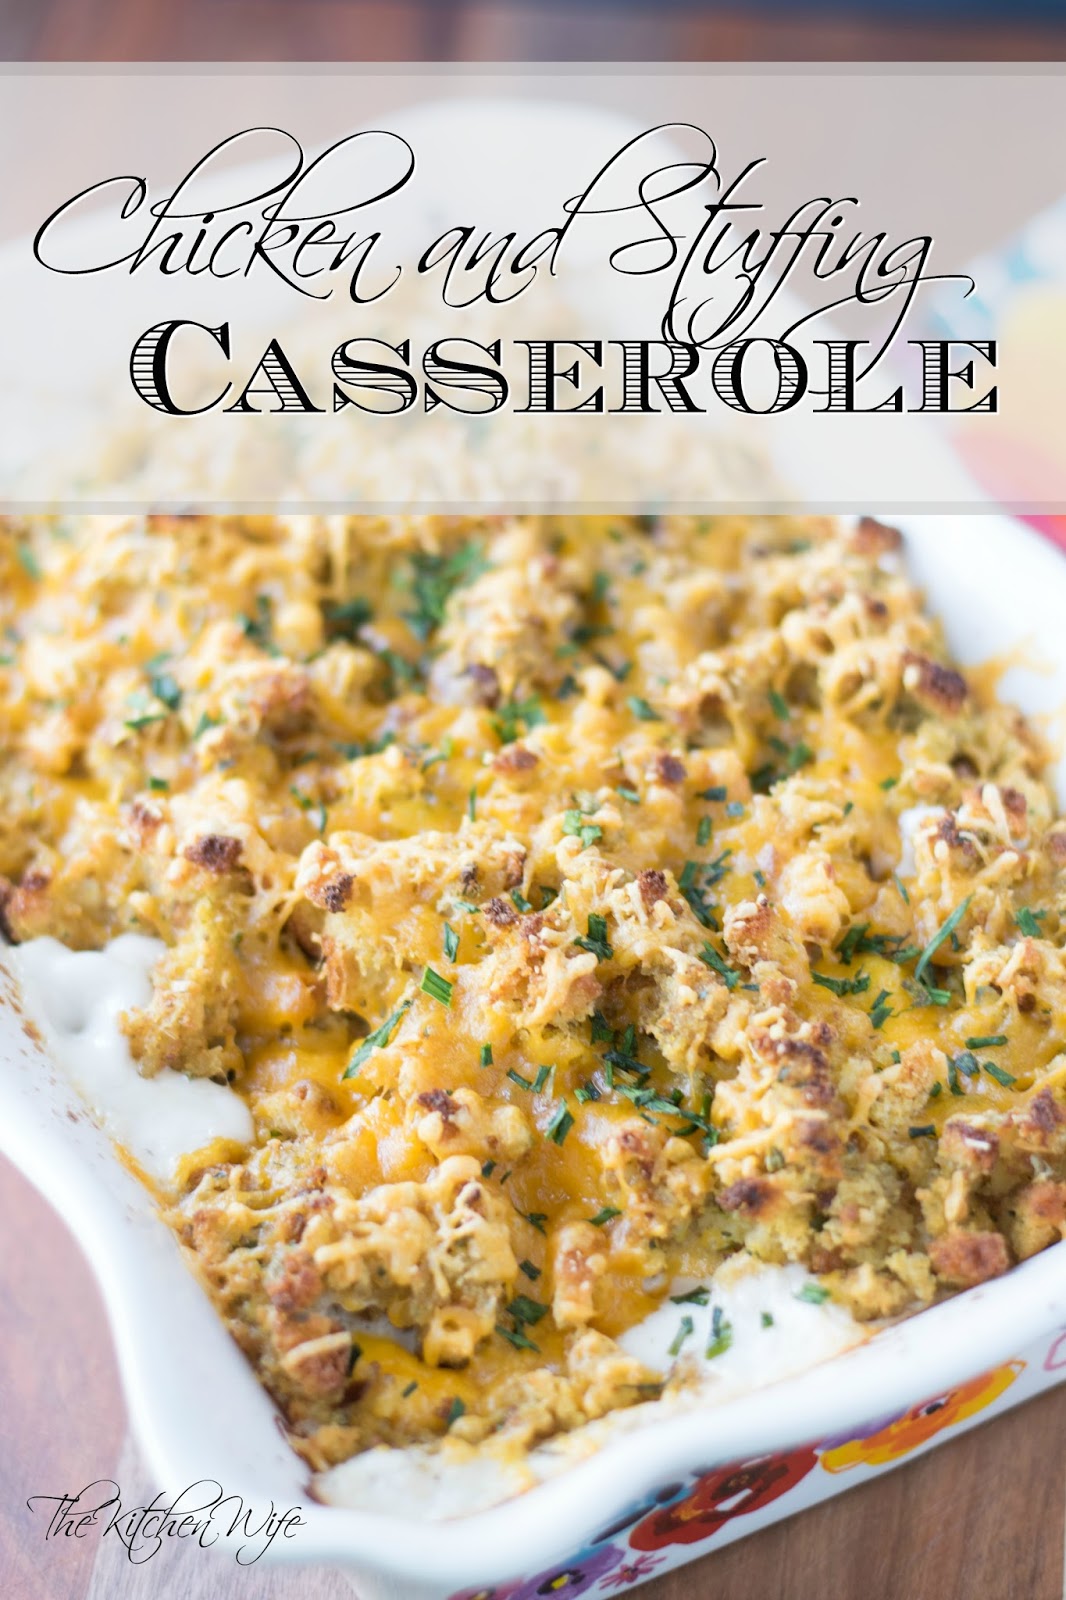 Chicken and Stuffing Casserole Recipe - The Kitchen Wife